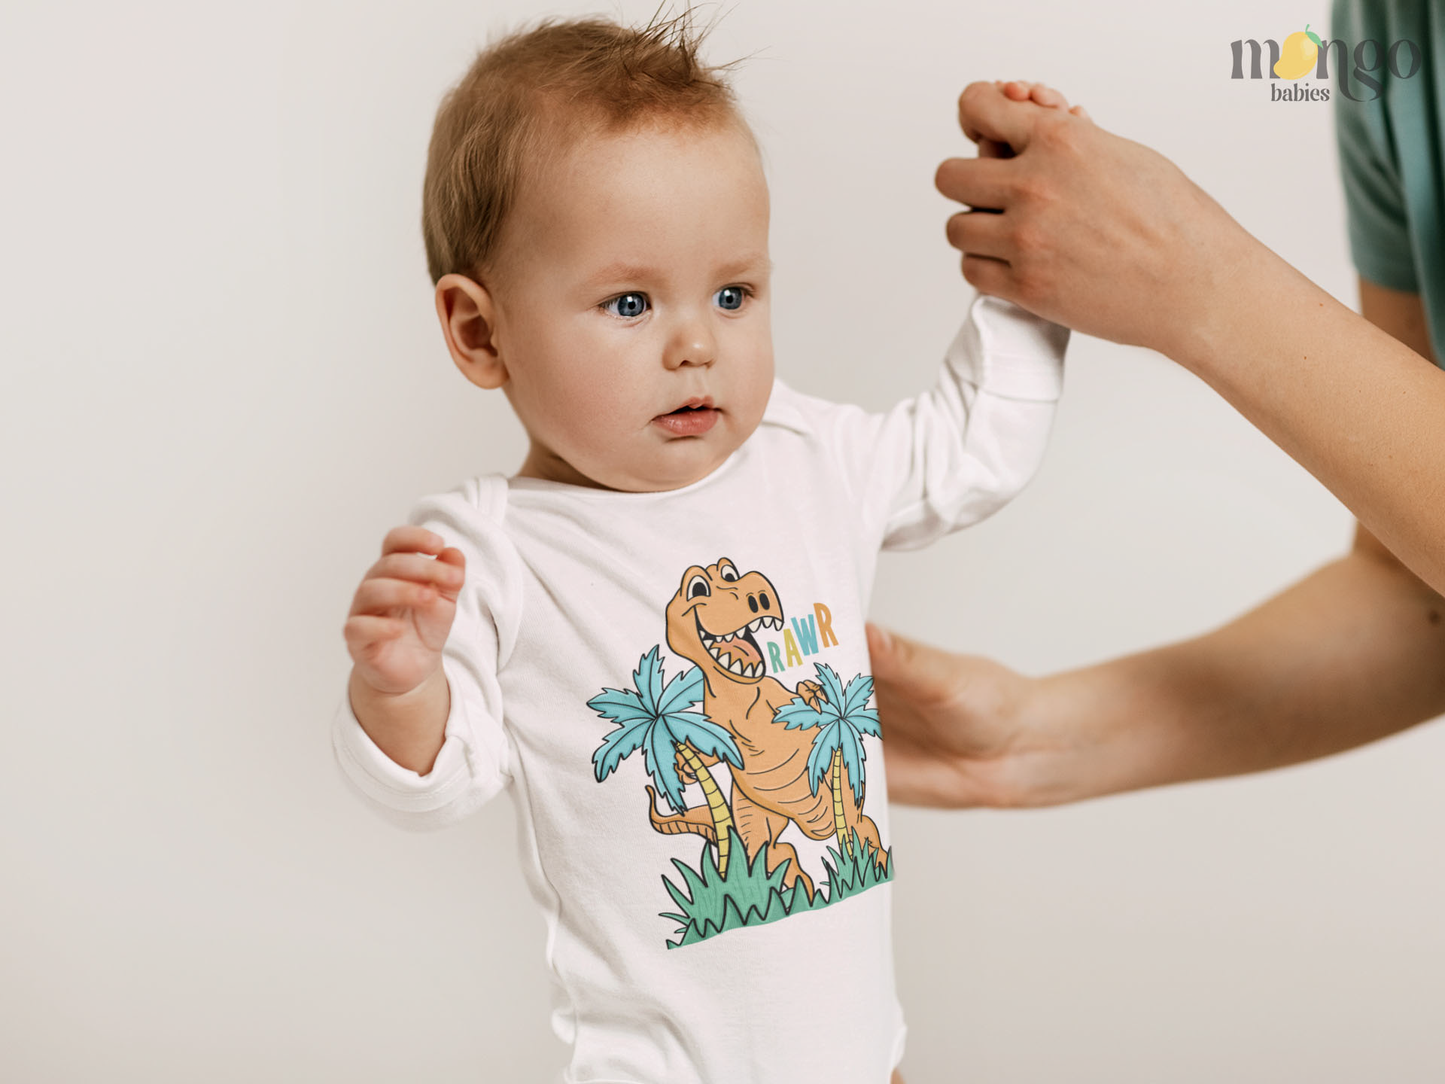 Long Sleeve Baby Bodysuit with a cute dinosaur graphic and the text 'Rawr'.